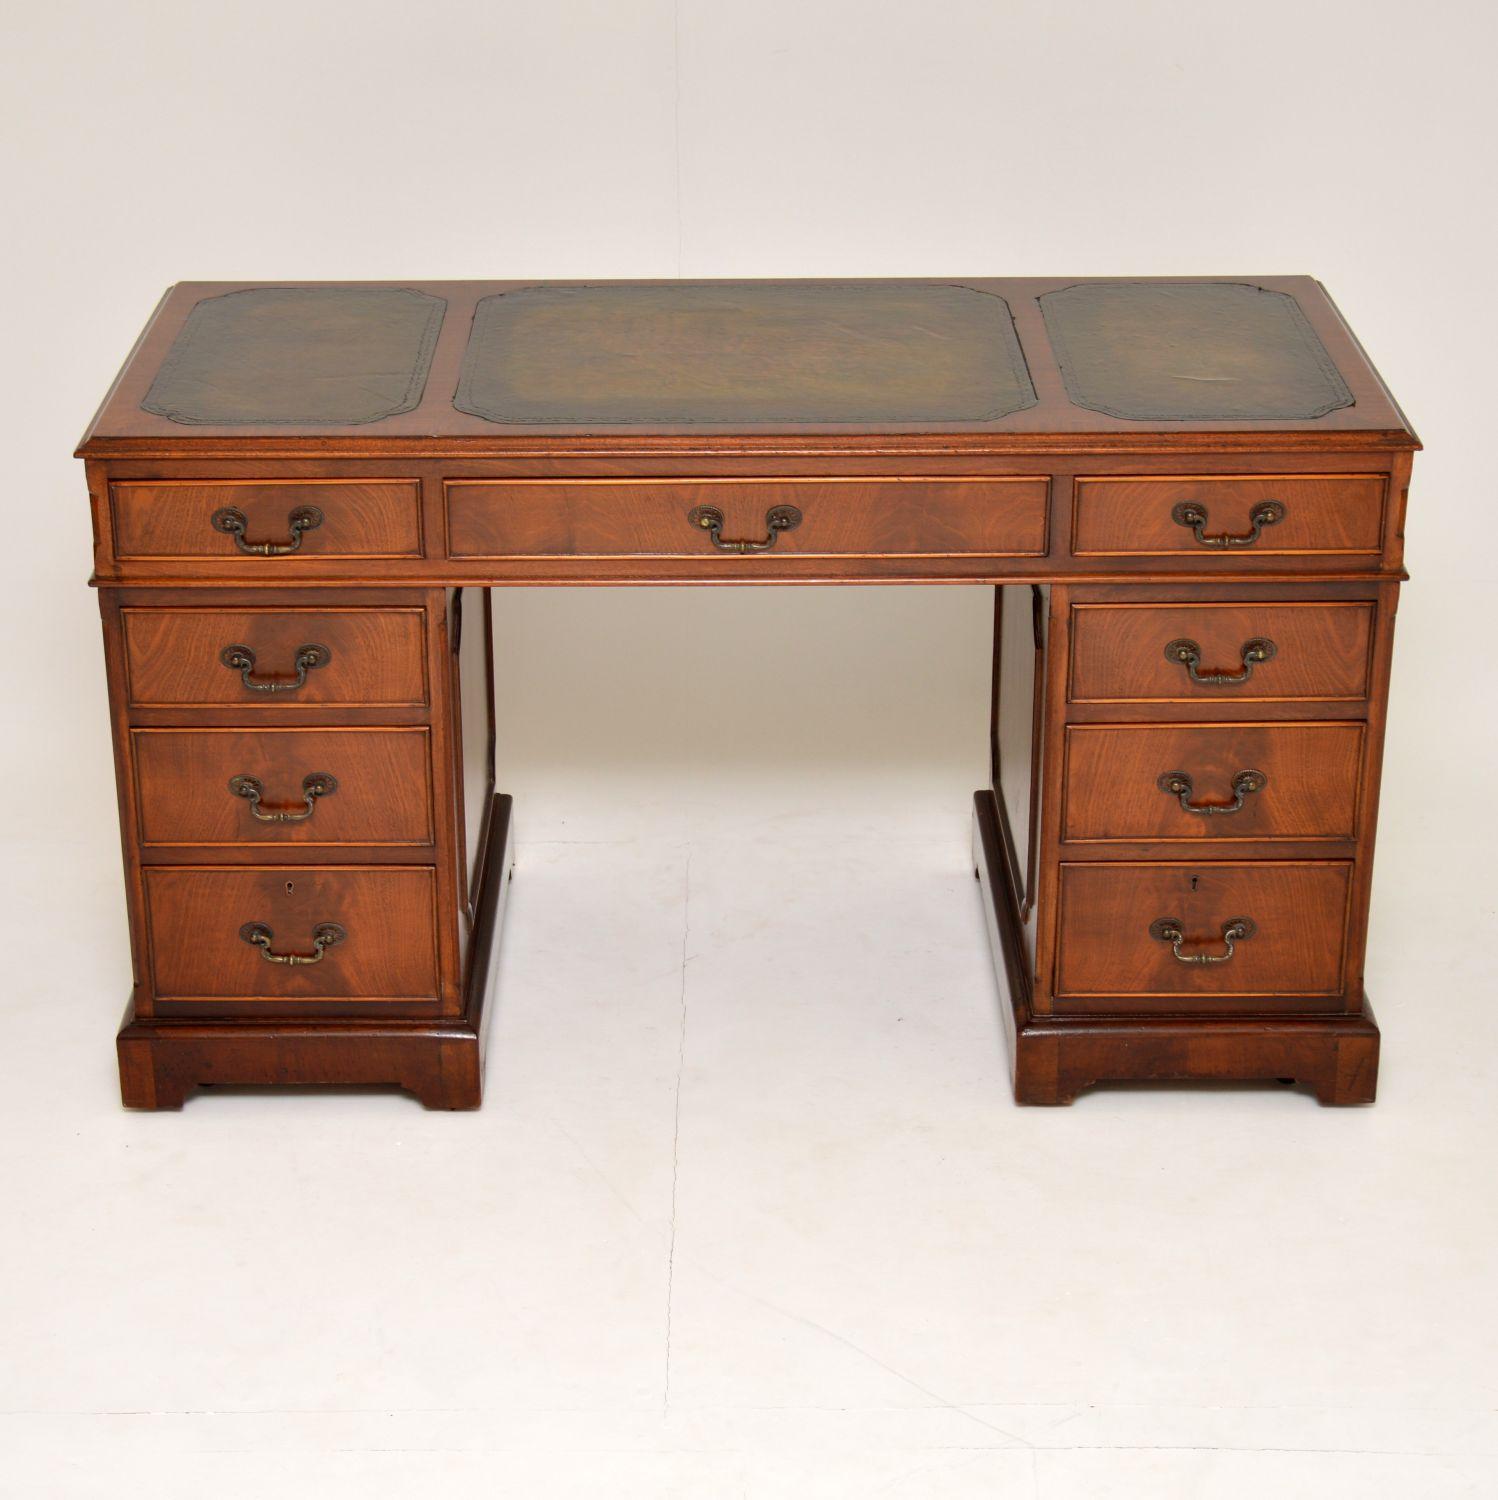 This antique mahogany pedestal desk has many fine features & is in excellent original condition. It’s George III style & dates to circa 1930s-1950s period. The top has a three hand colored tooled leather writing surfaces. The right hand one has a